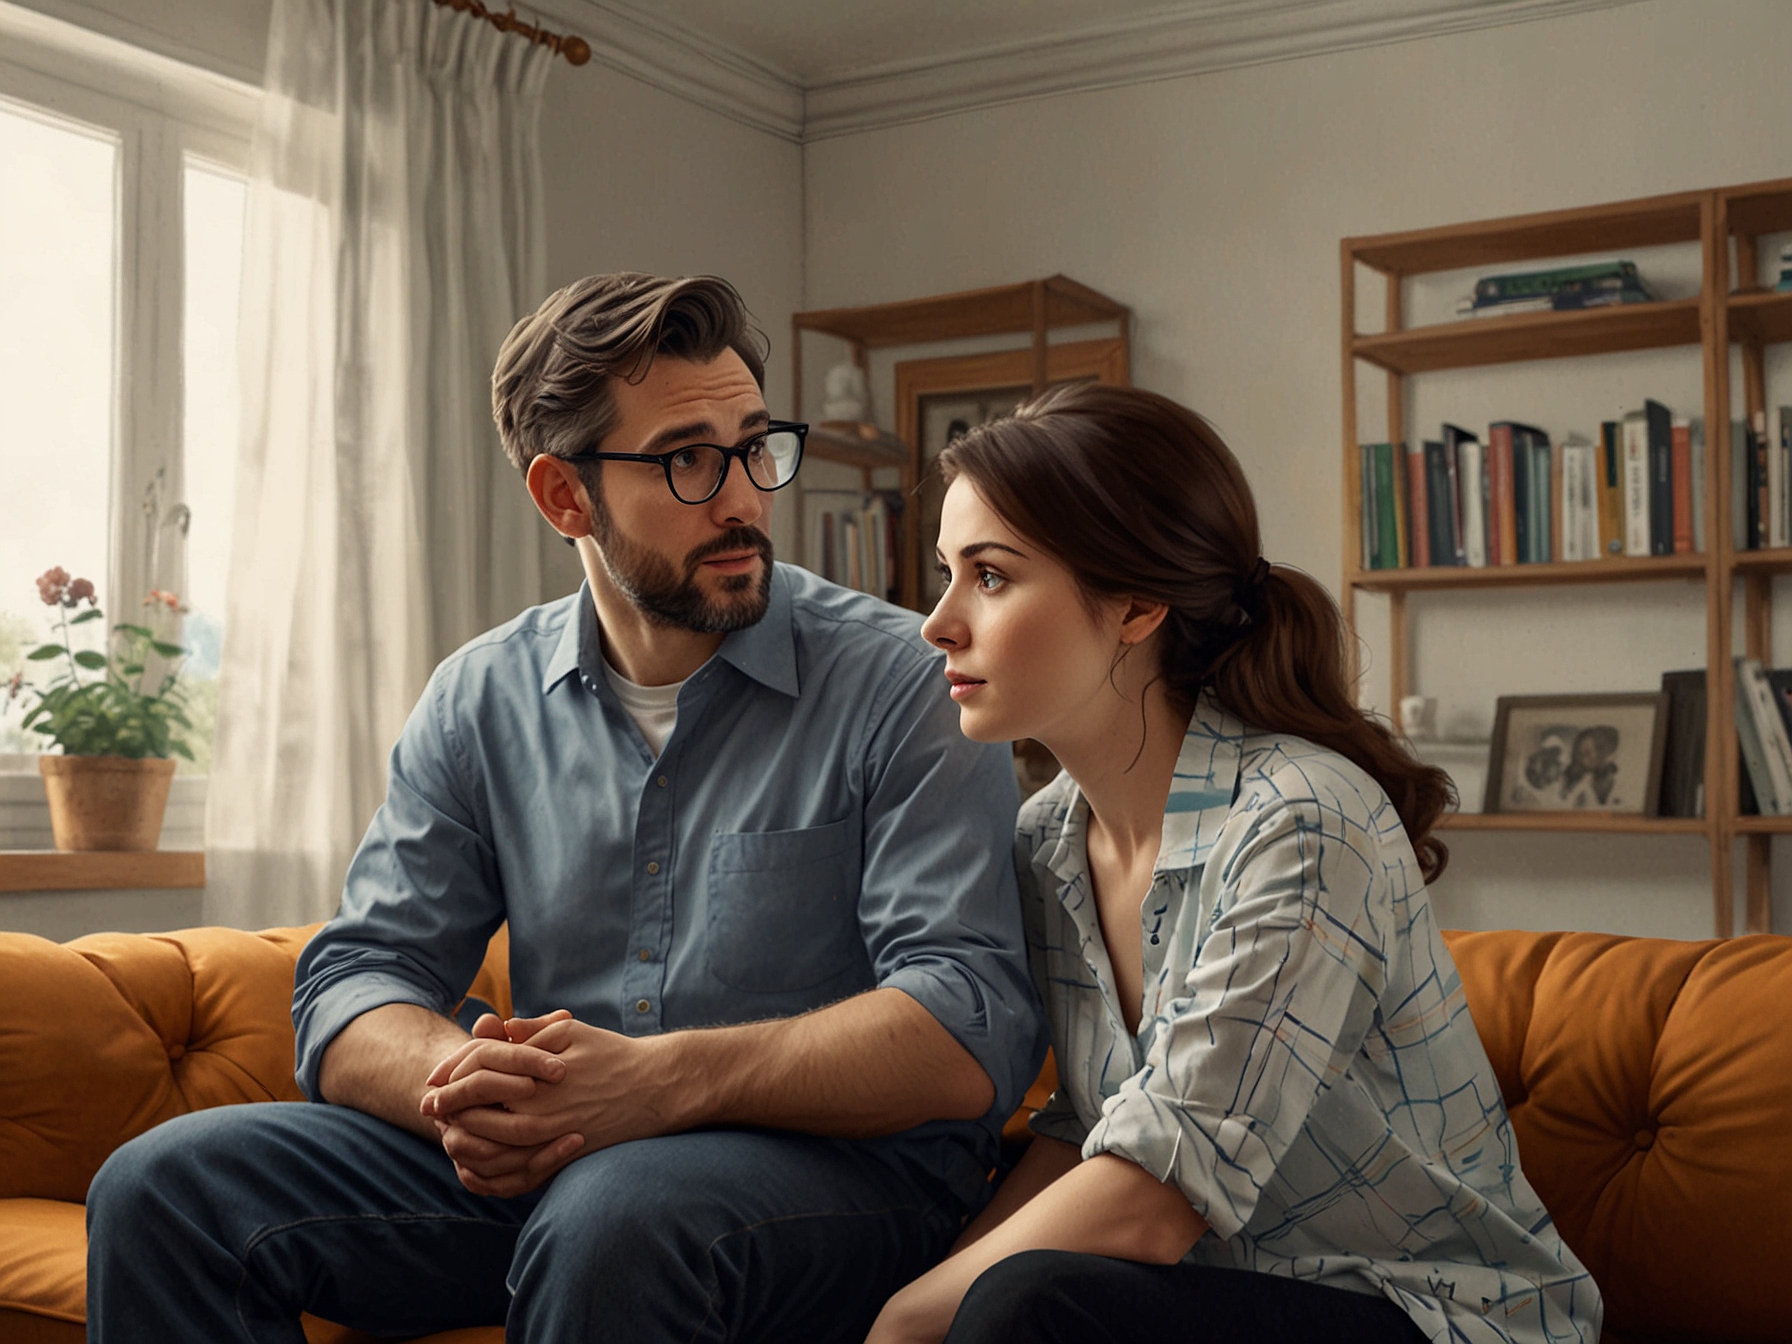 A couple having a serious conversation at home, representing the importance of open dialogue and compromise when dealing with differing opinions on having more children.